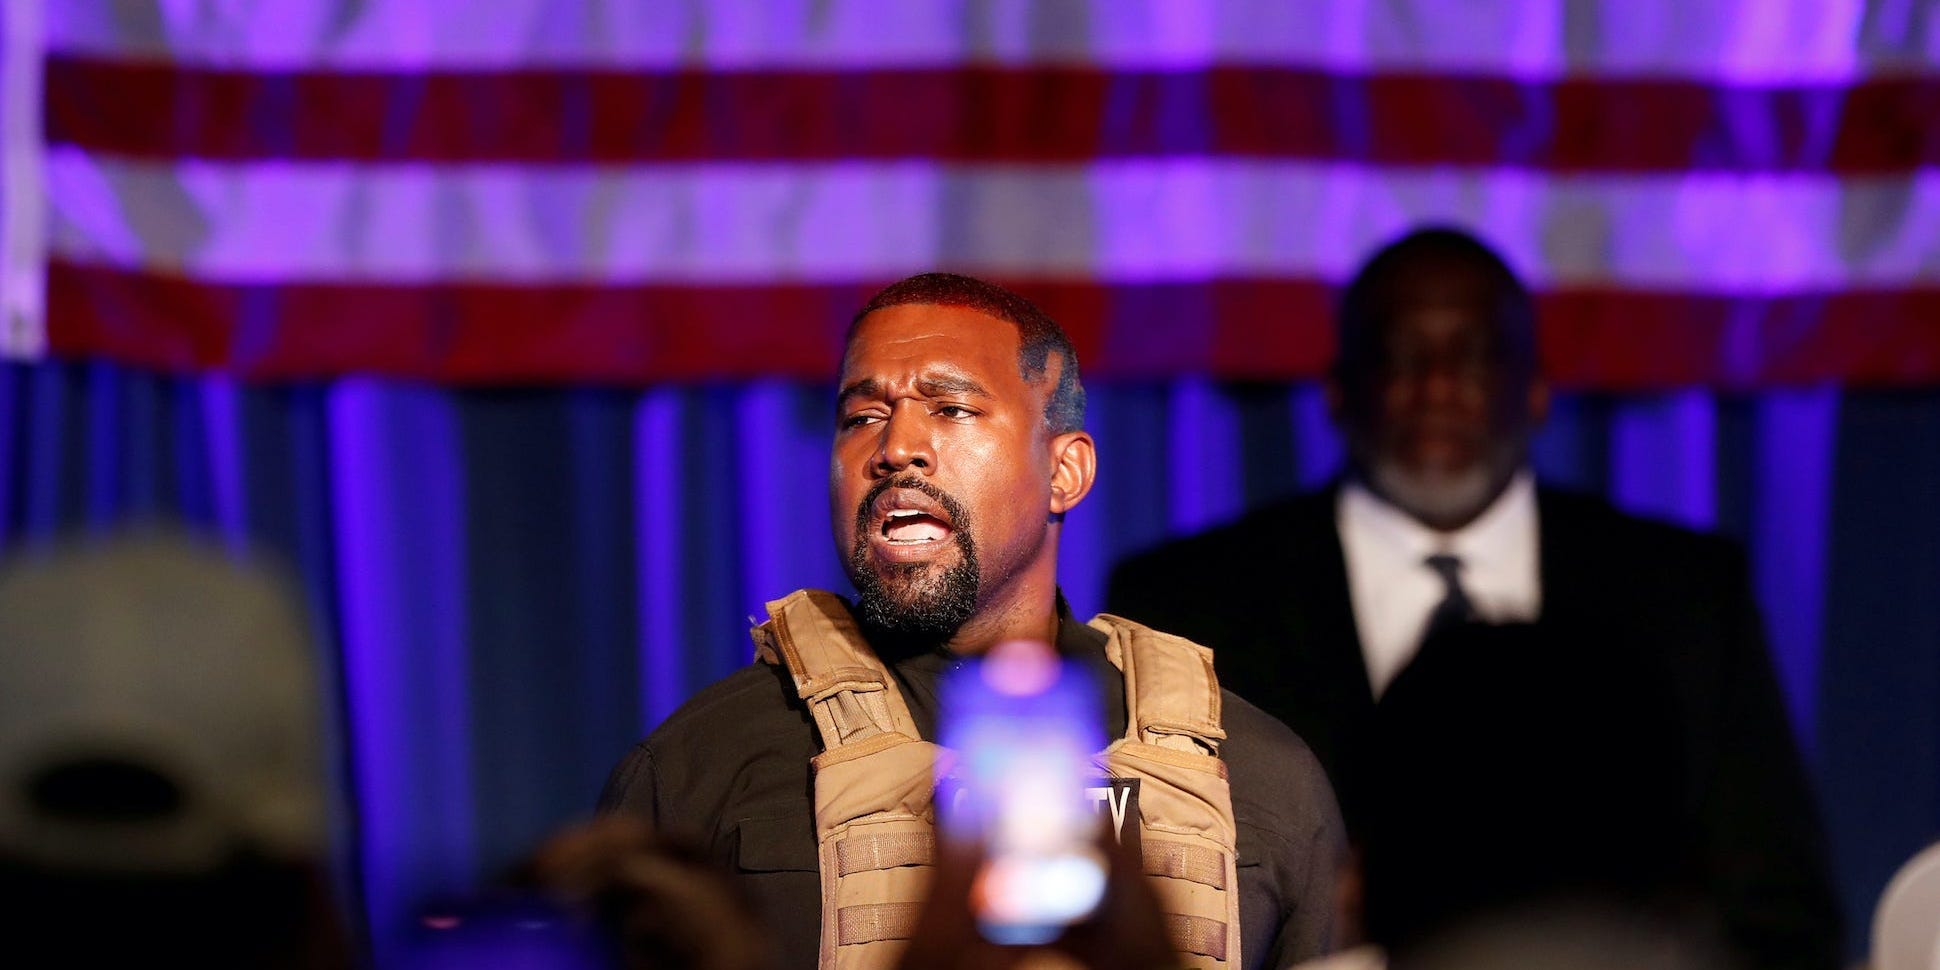 Kanye West at a campaign event in South Carolina in July.